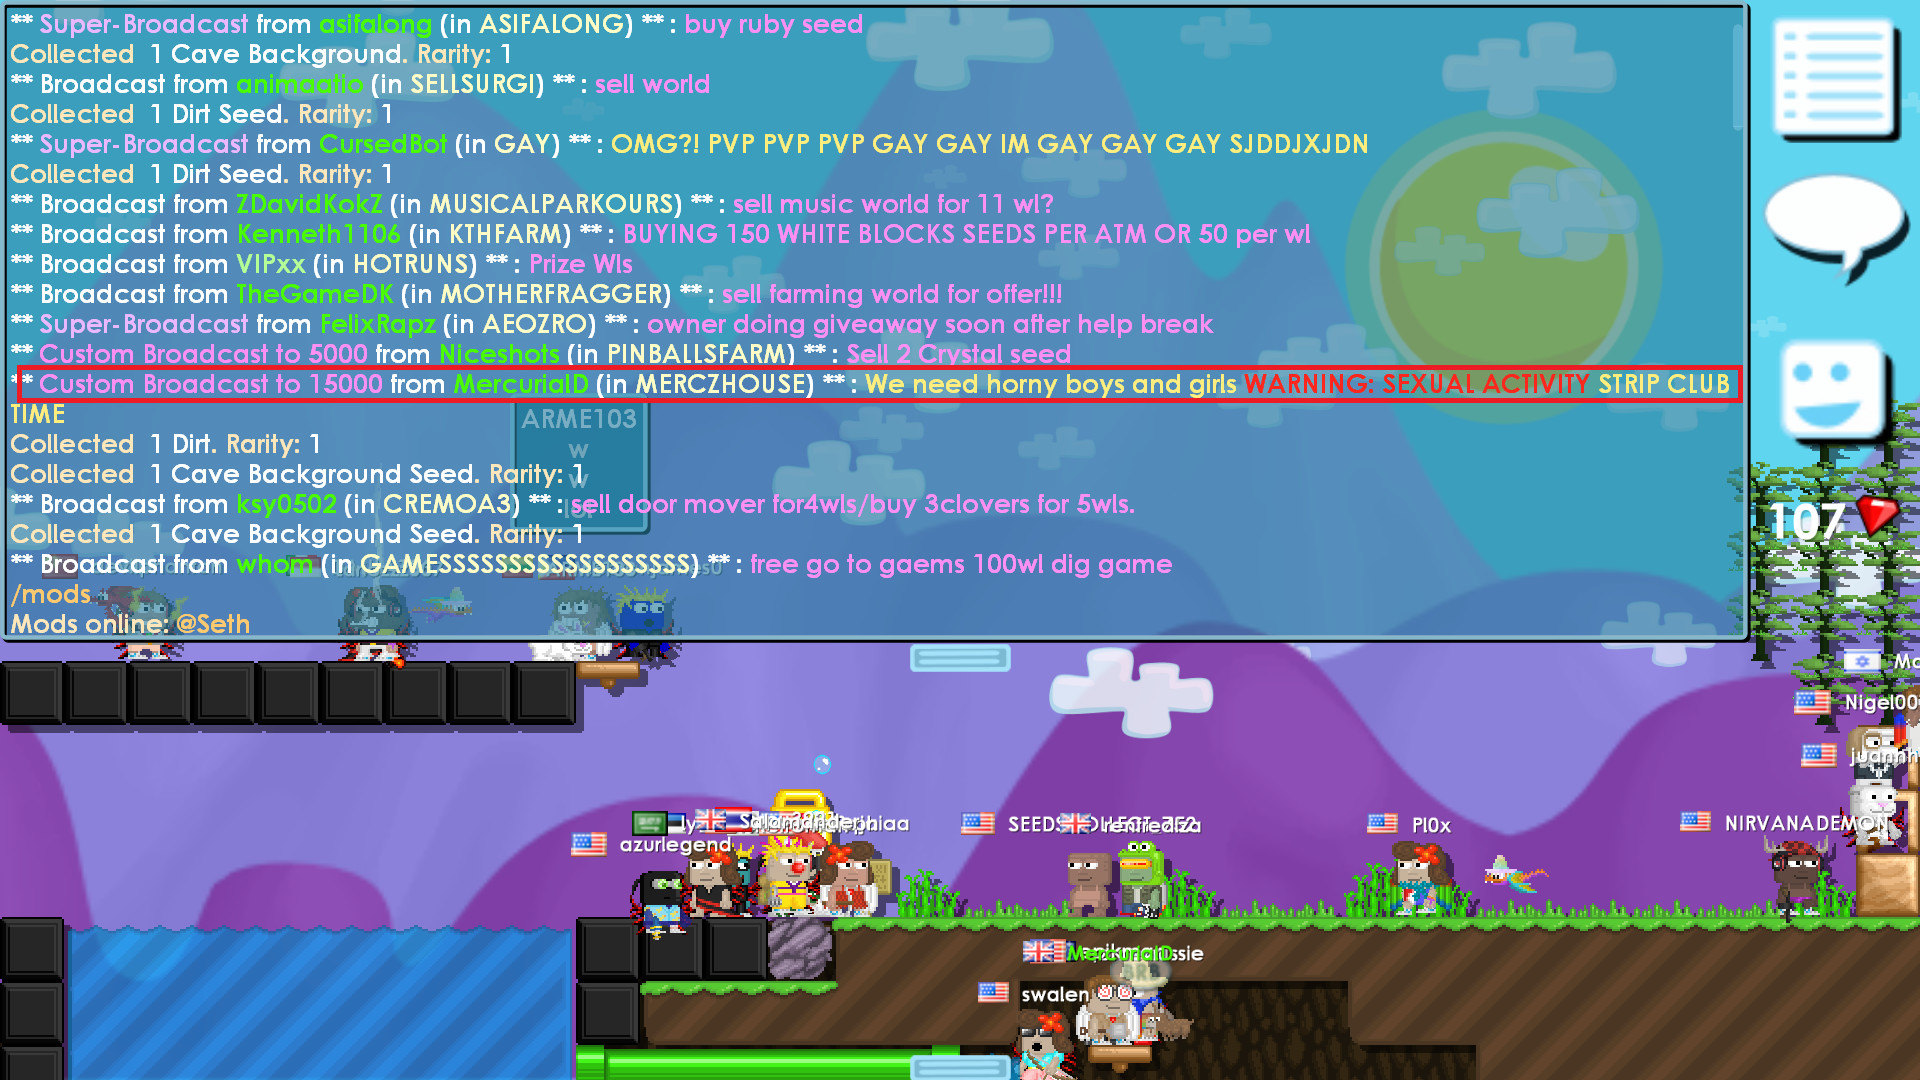 1920x1080 What the hell! I hope people like this will be banned! Why do these  perverts even join Growtopia? Why isn't Solorien online more often